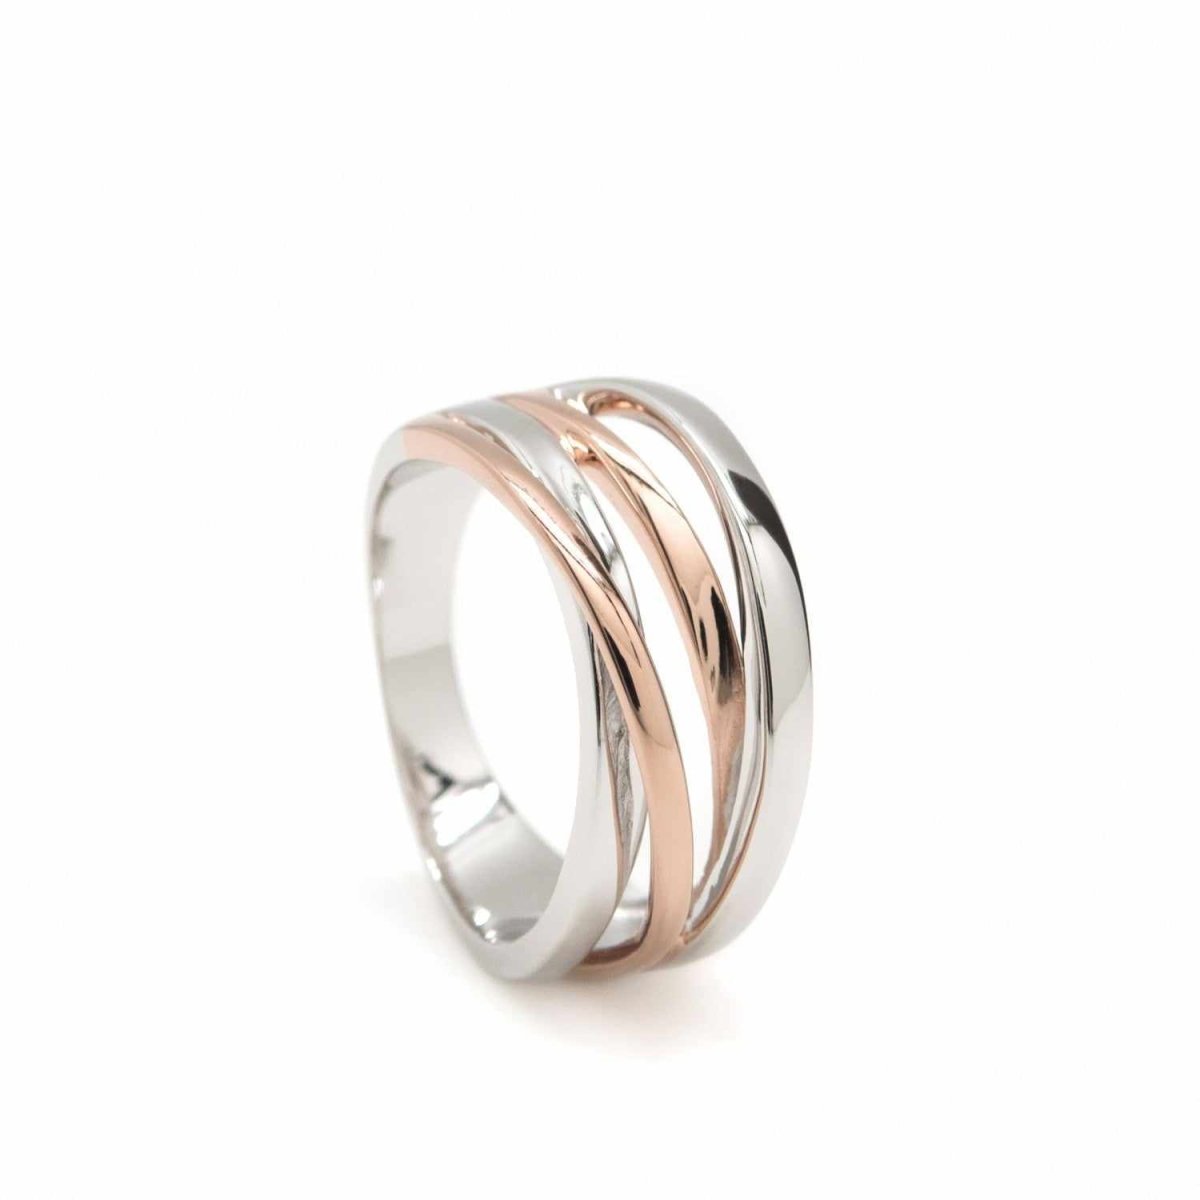 Ring - Wide silver rings with quadruple bicolor design